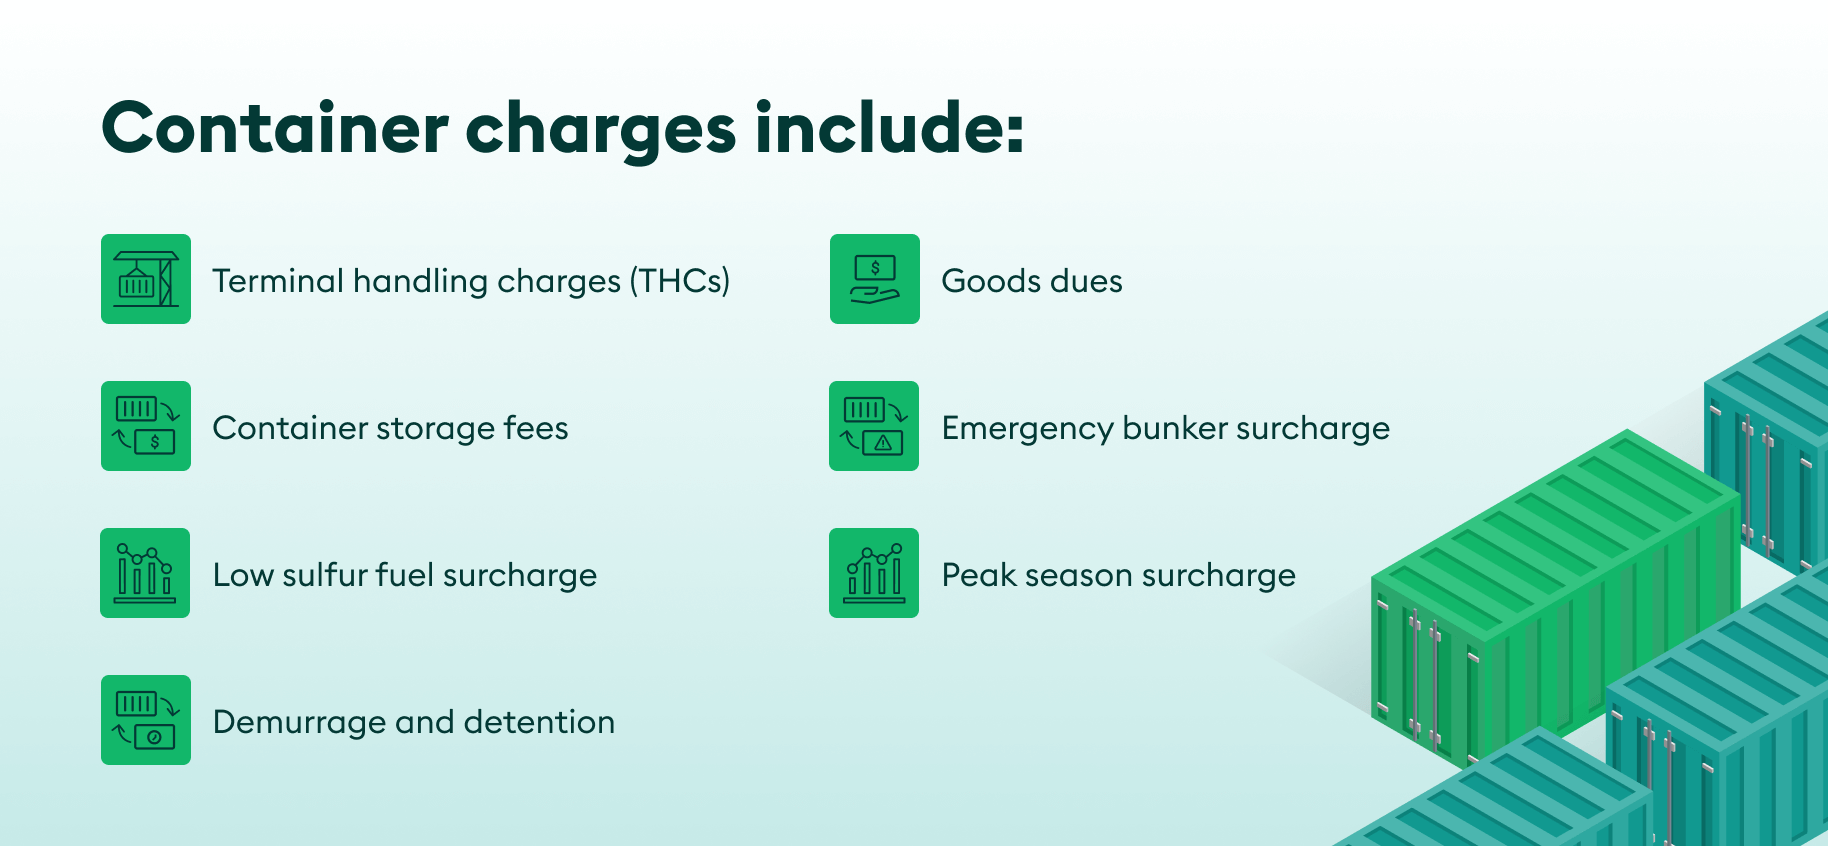 What are some common container charges?